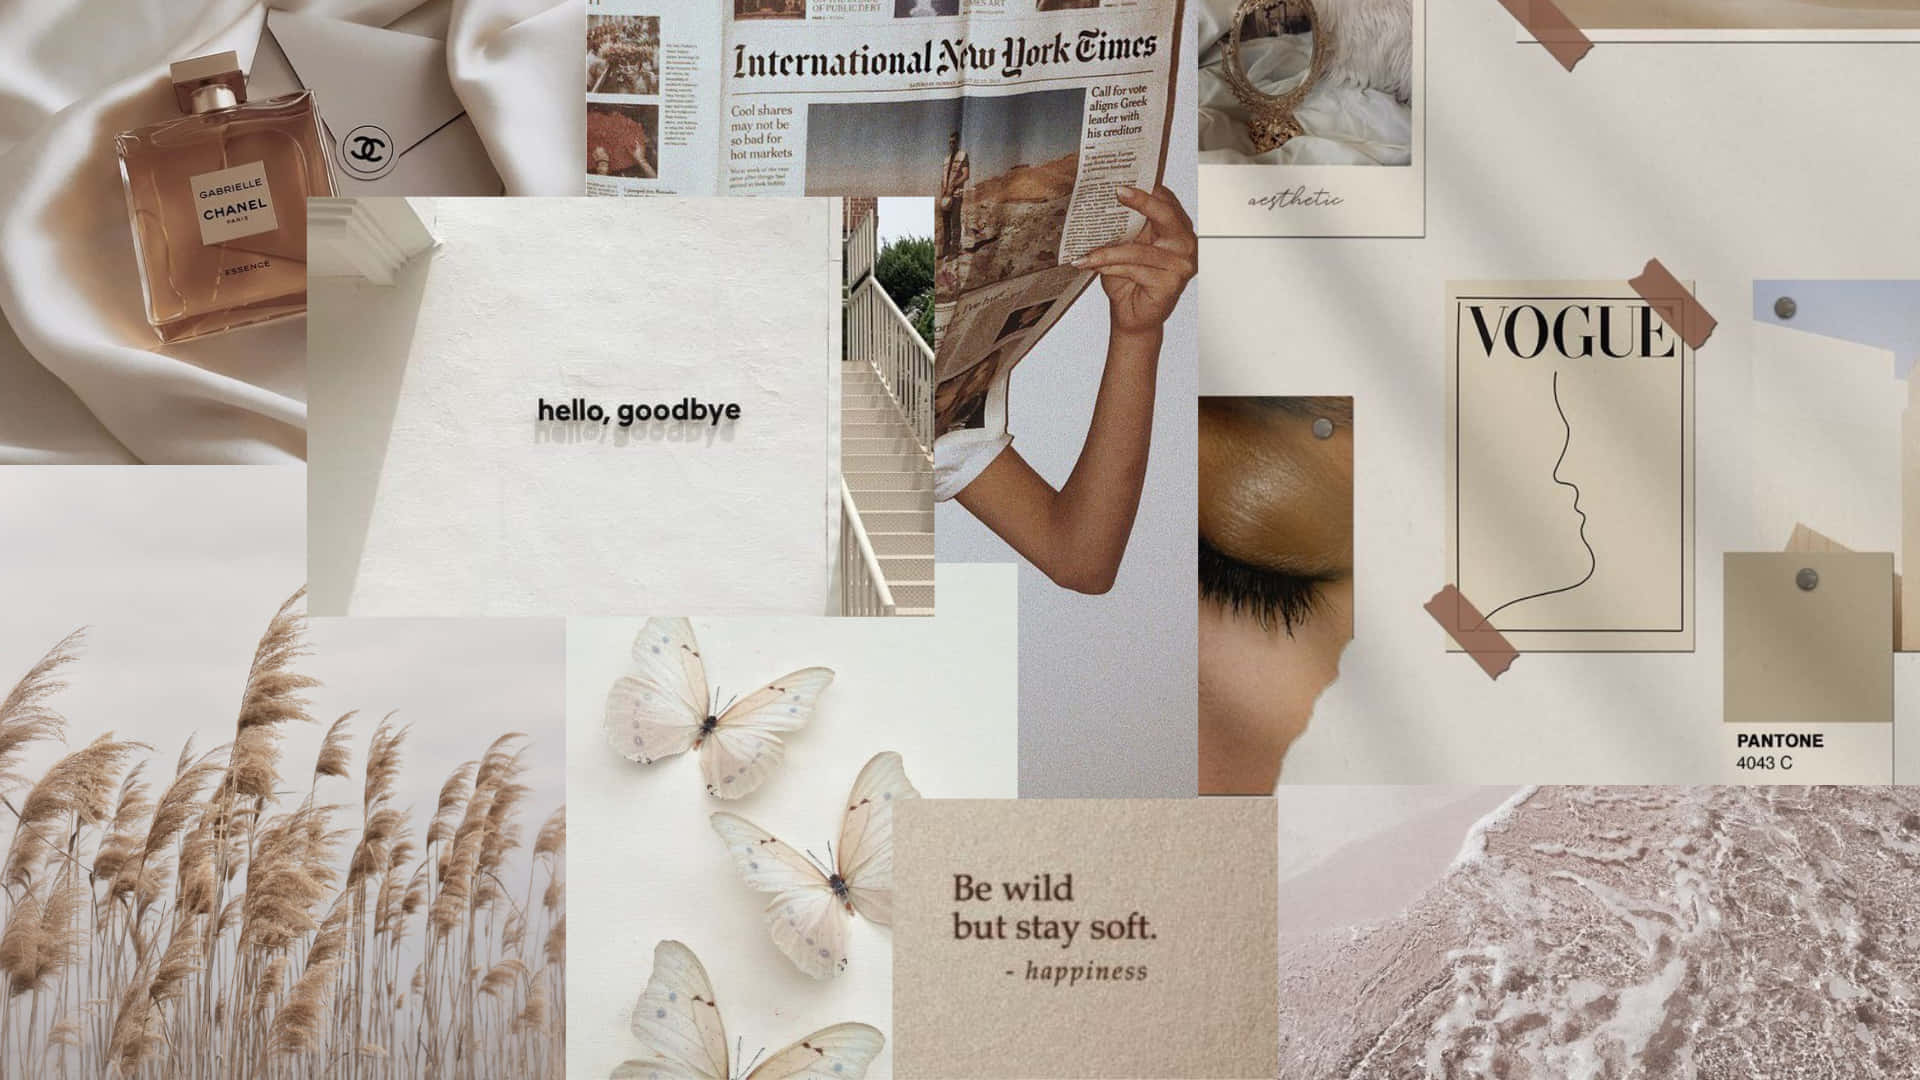 A Collage Of Images Of A Magazine, A Newspaper, And A Magazine Wallpaper